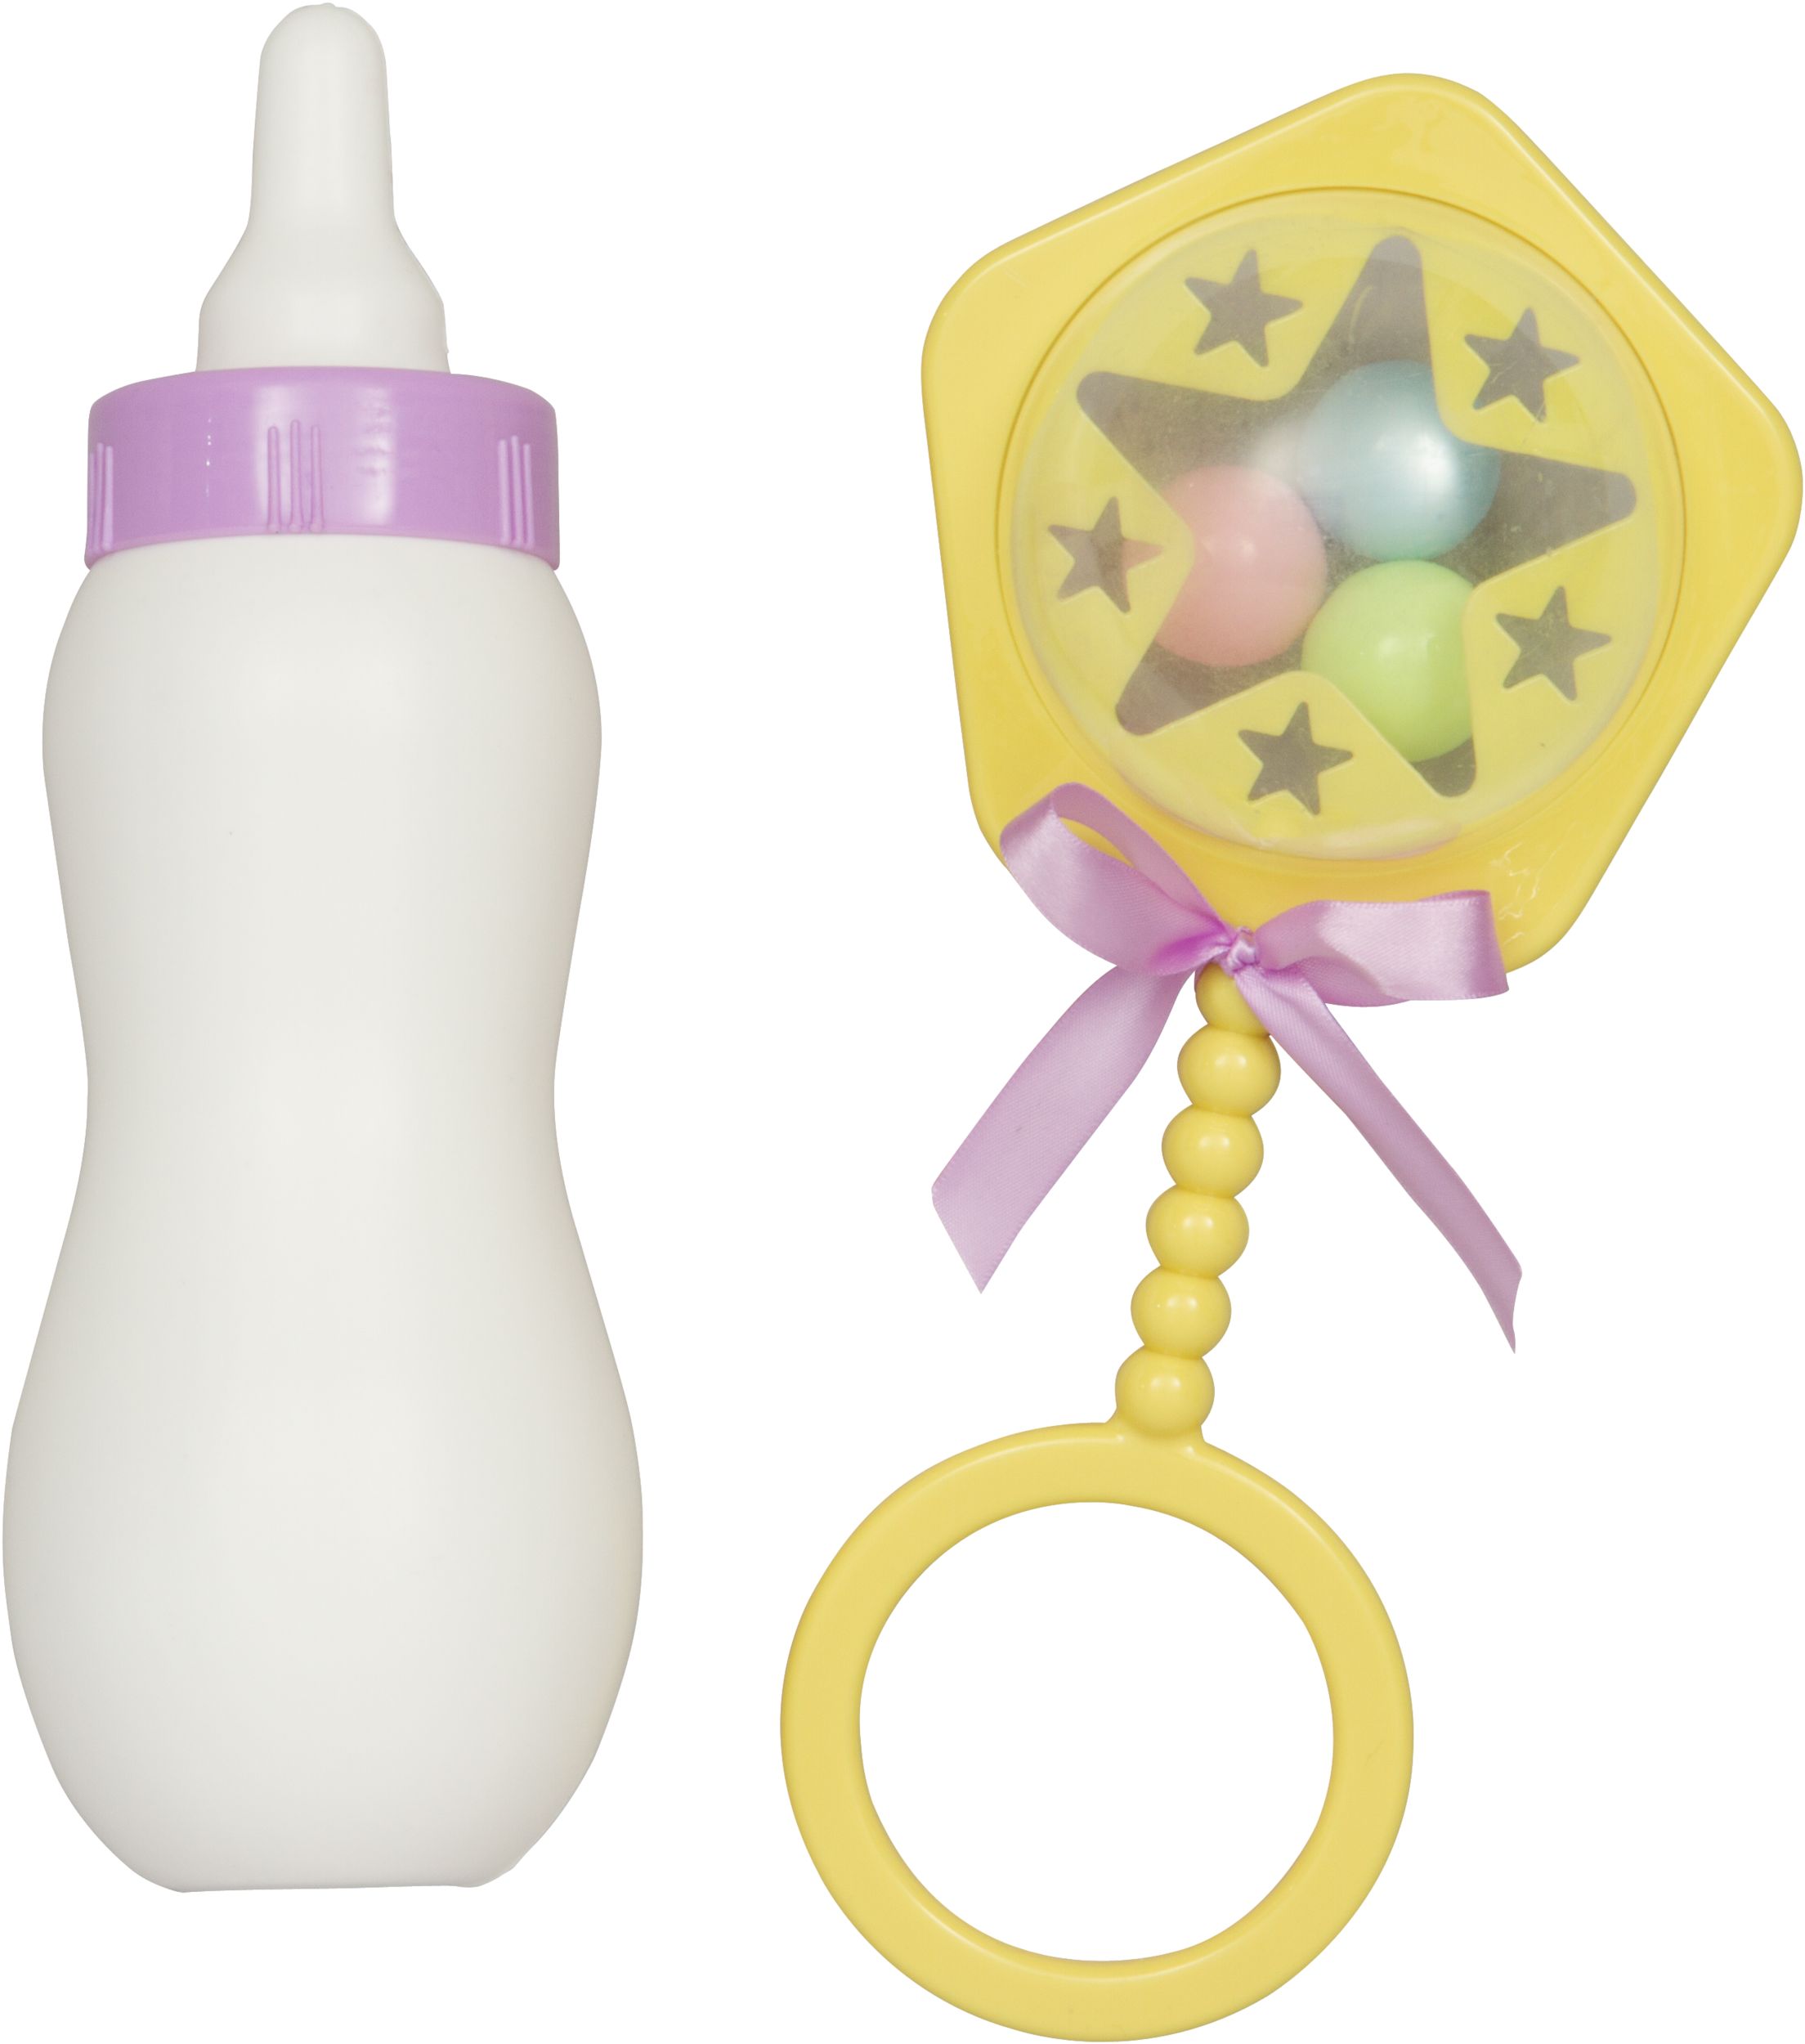 Big Baby Bottle & Rattle, White/Yellow, One Size, 2-pk, Wearable Costume  Props for Halloween